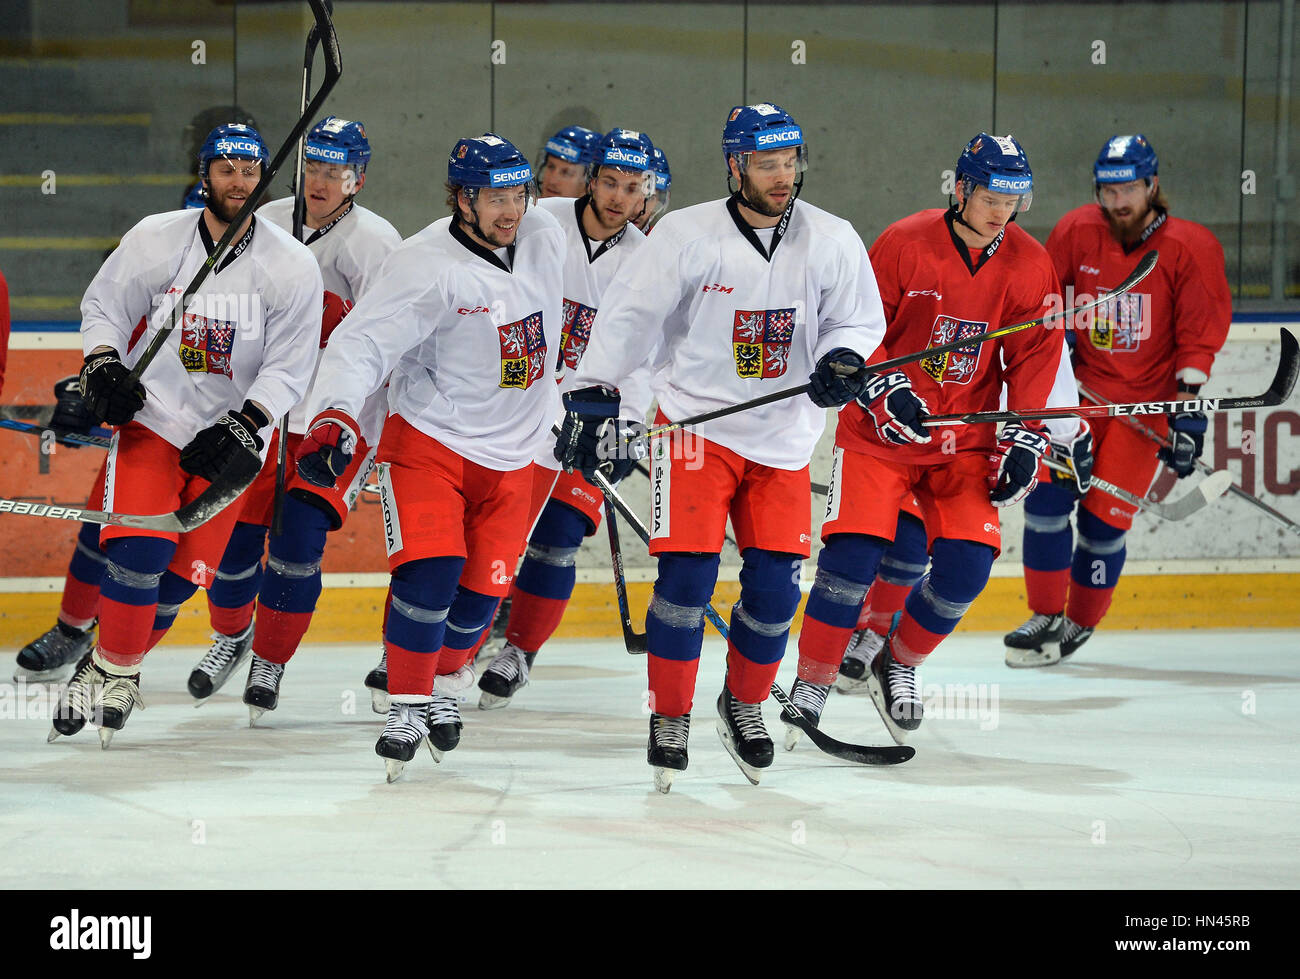 Prague, Czech Republic. 08th Feb, 2017. The Czech national ice-hockey team's players in action during the training session prior to the February Sweden Games in Gothenburg in Prague, Czech Republic, February 8, 2017. Sweden Games, the third part of the European Hockey Tour (EHT) series, will take place on February 9-12. Credit: Katerina Sulova/CTK Photo/Alamy Live News Stock Photo